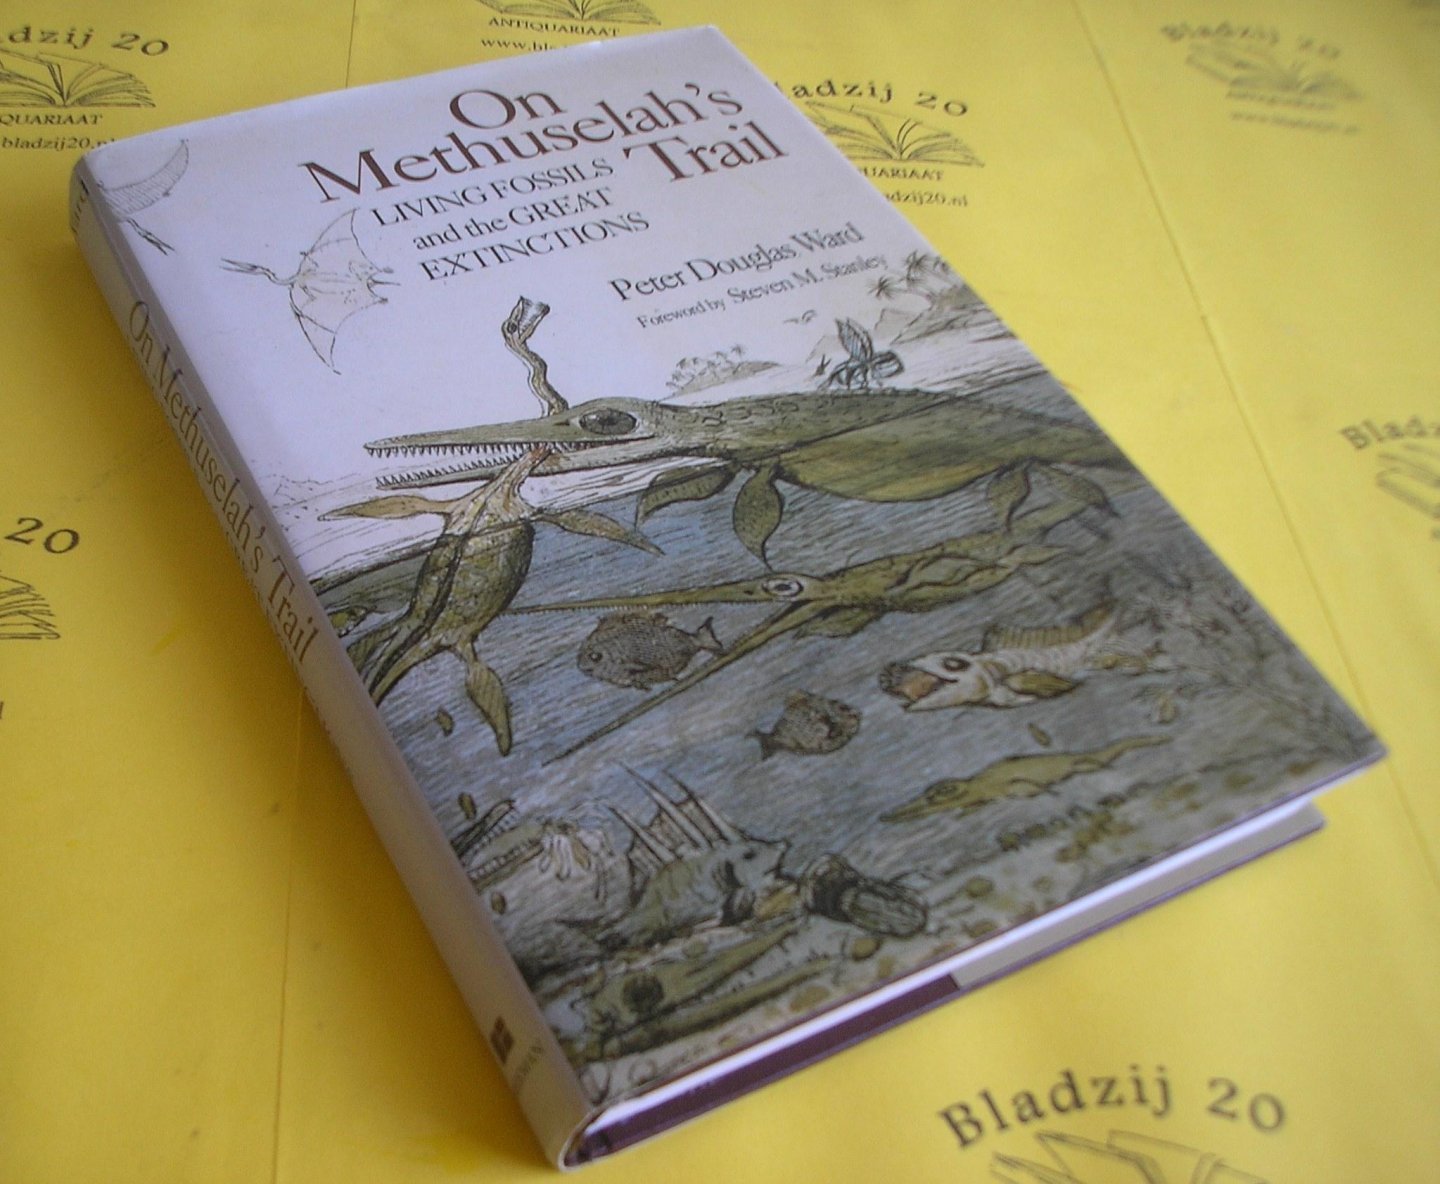 Ward, Peter Douglas. - On Methuselah`s Trail. Living fossils and the great extinctions.